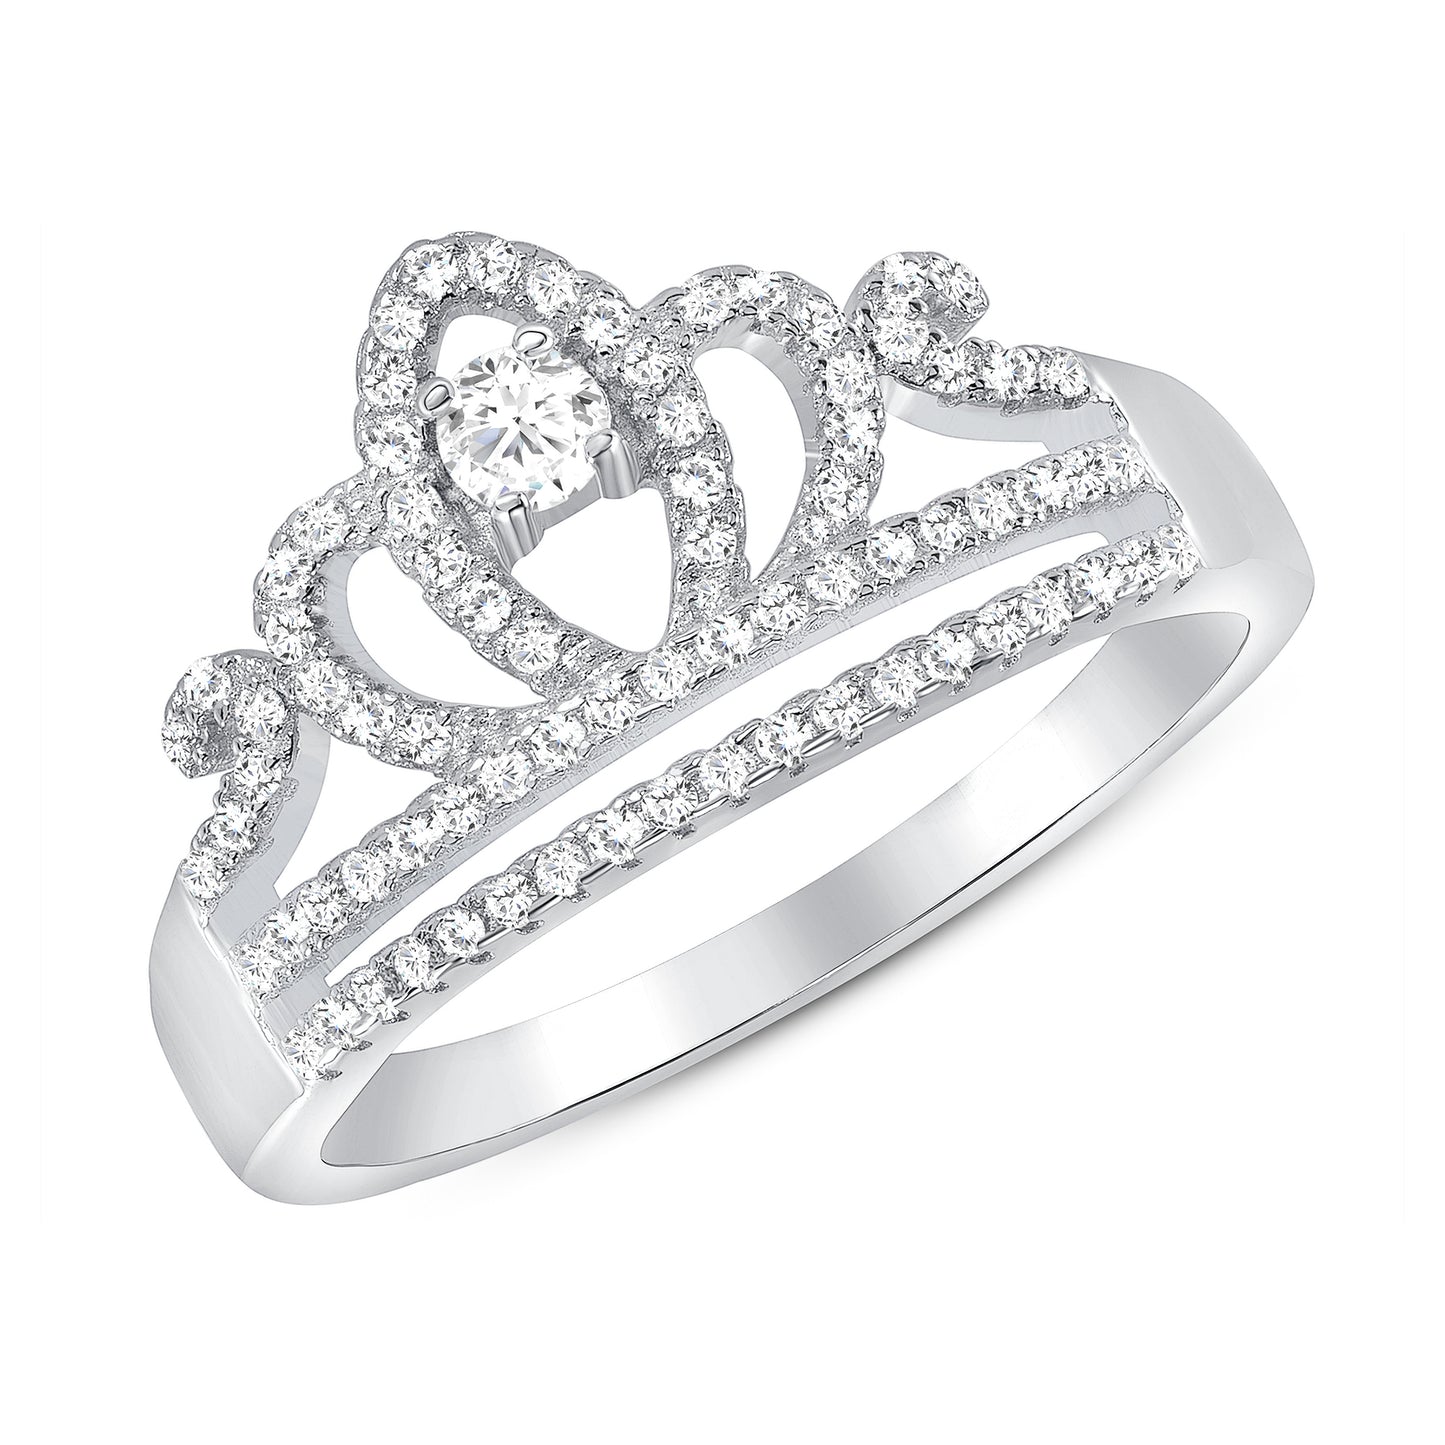 Silver 925 Rhodium Plated Cubic Zirconia Crown Ring. DGR1771